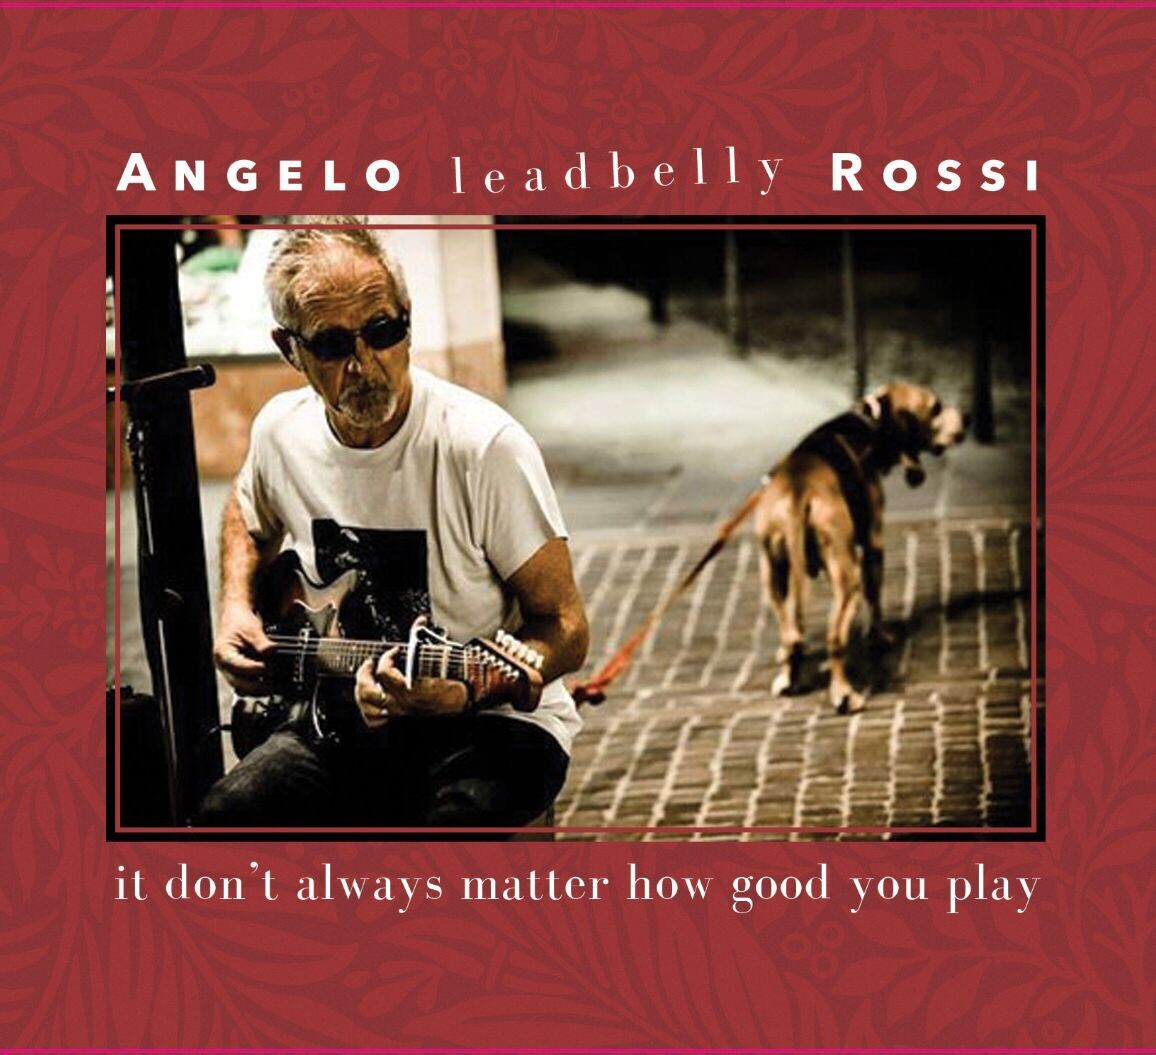 ANGELO LEADBELLY ROSSI - "It Don't Always Matter How Good You Play" (CD)